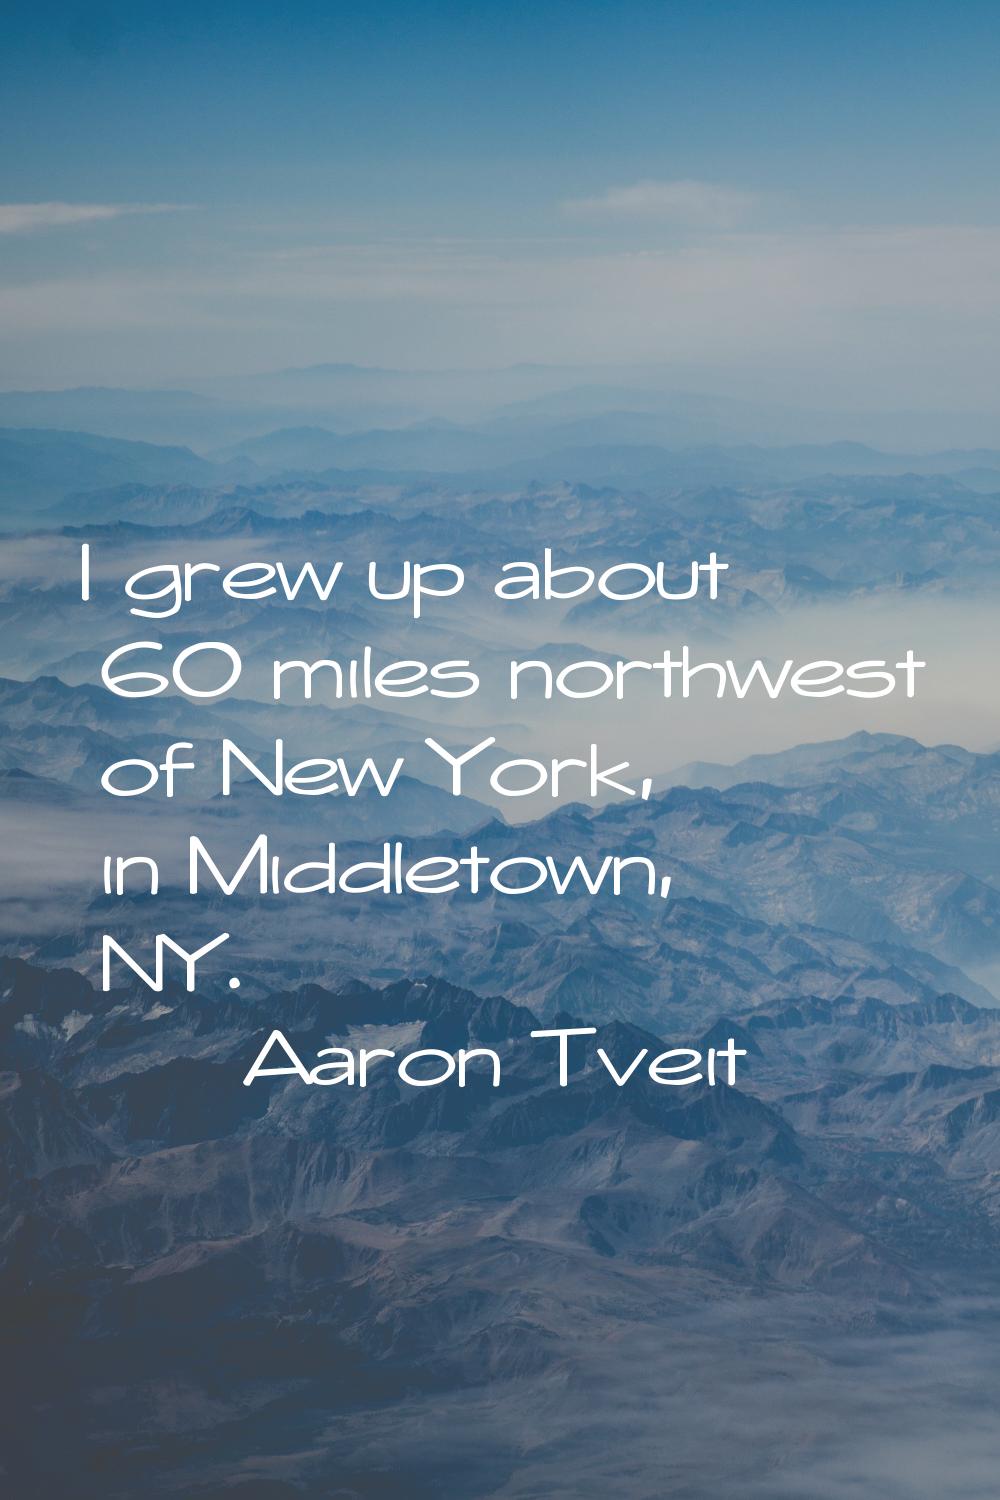 I grew up about 60 miles northwest of New York, in Middletown, NY.